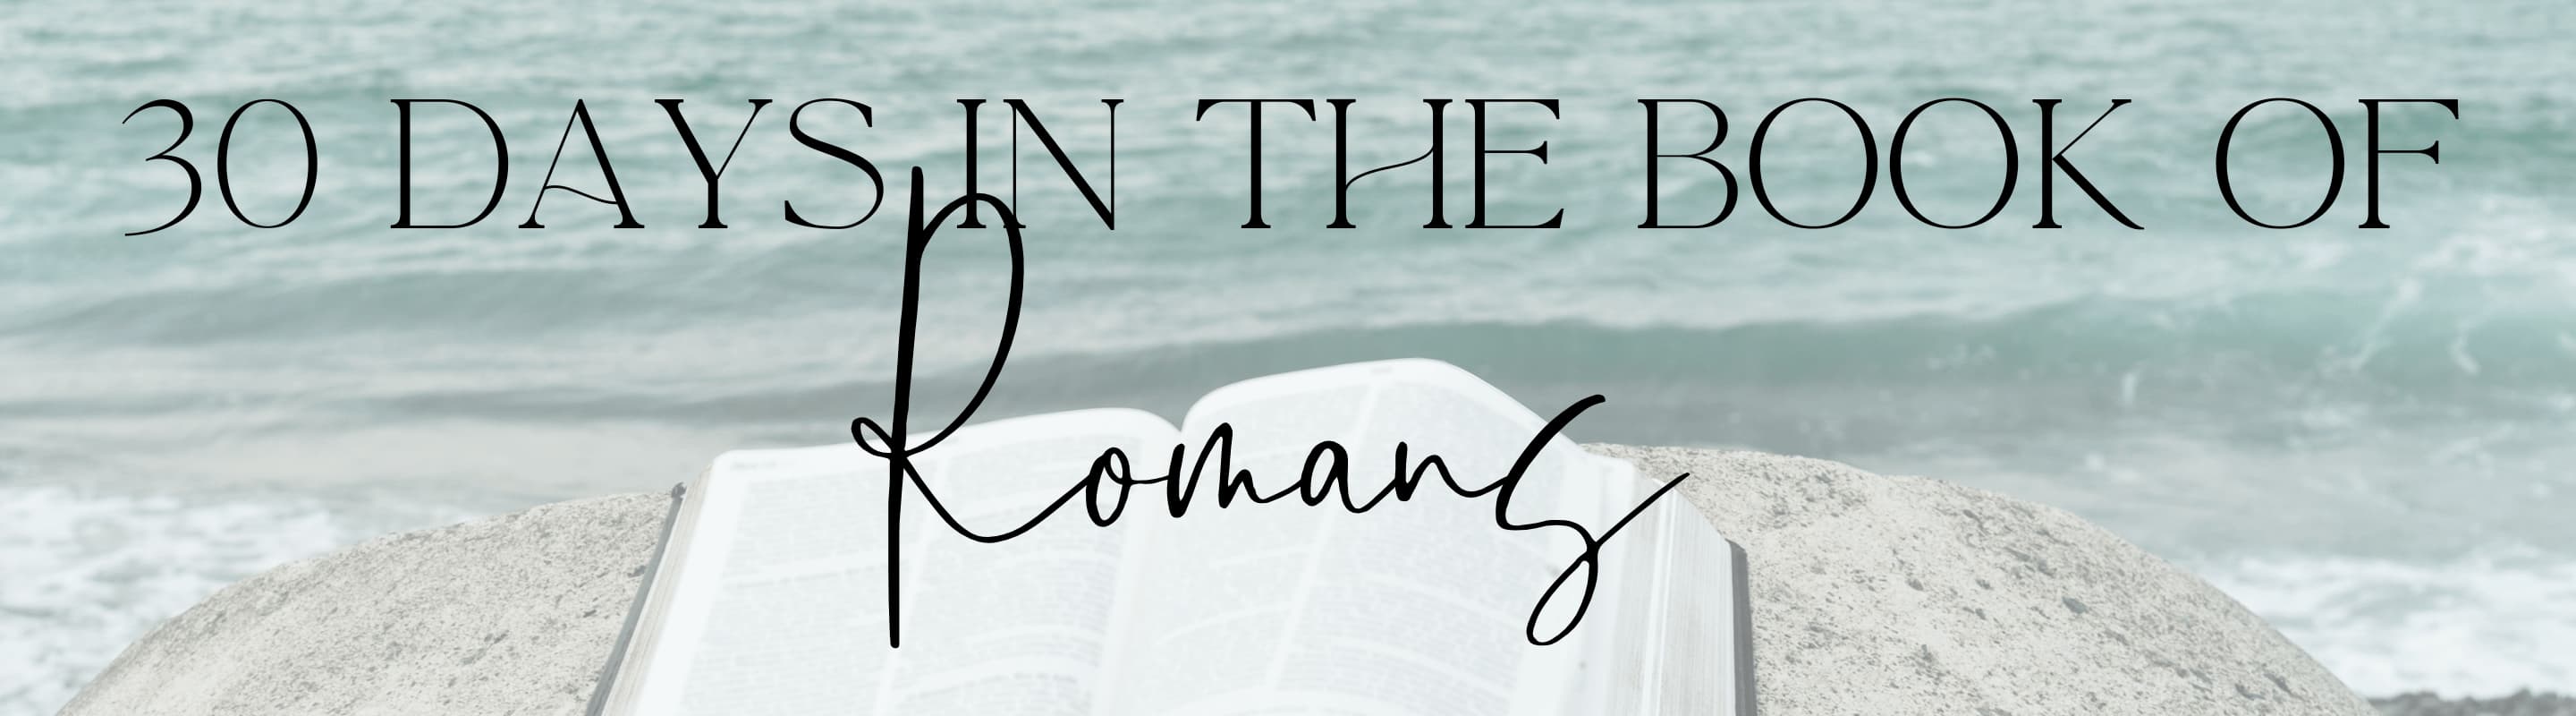 30 Days in the Book of Romans